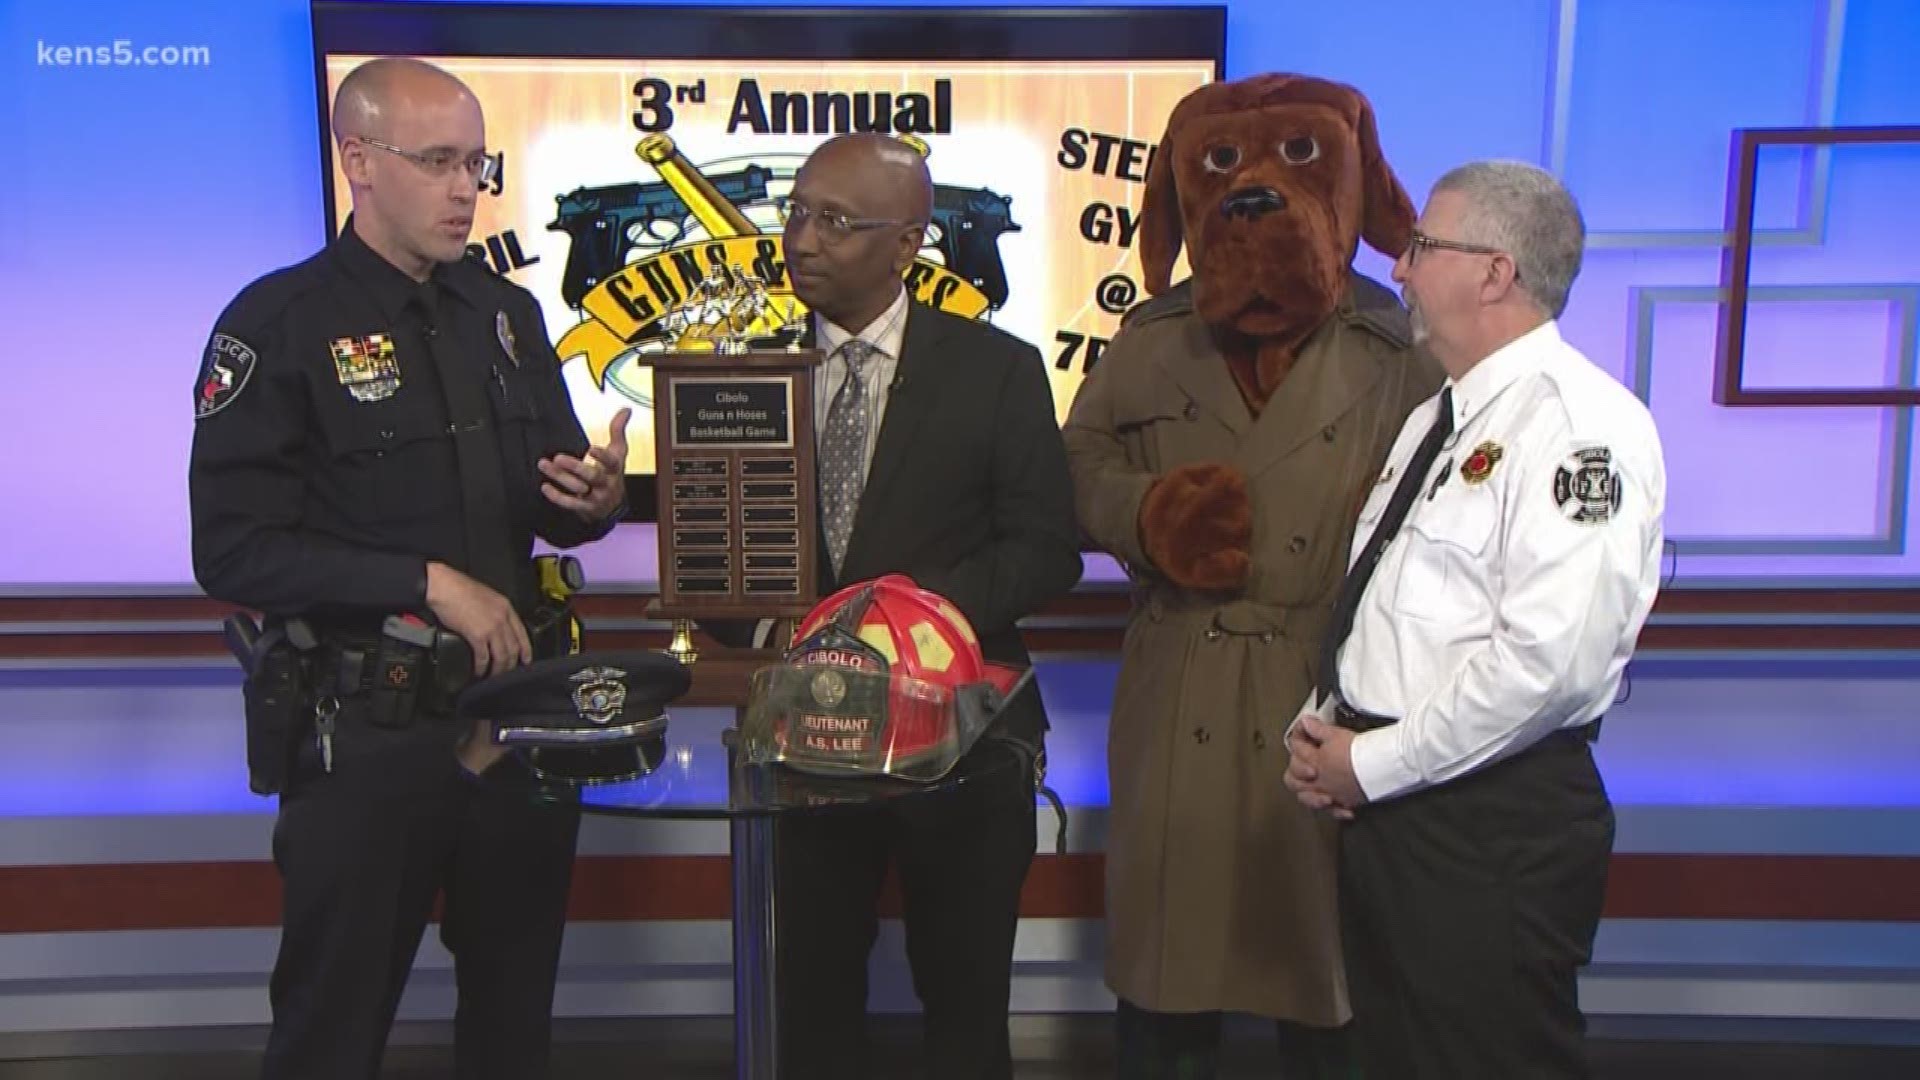 The Cibolo Police Department and Fire Department will take each other on in the third annual "Guns N Hoses" basketball game benefitting the food bank.